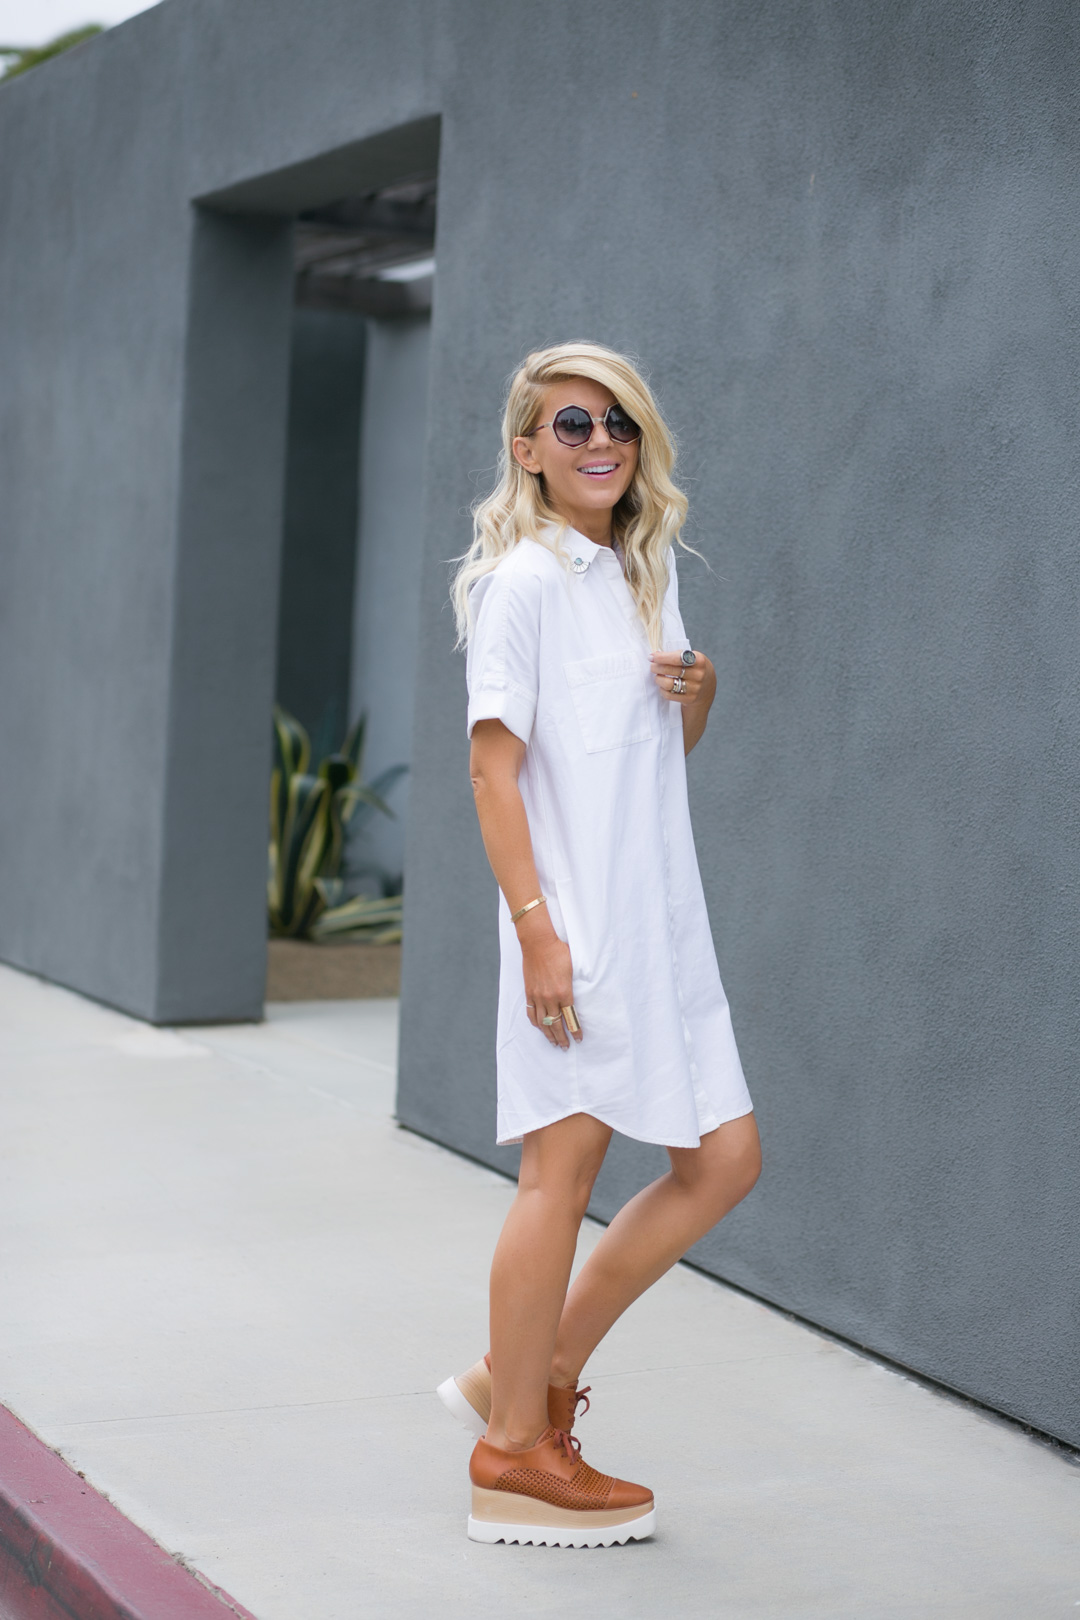 lisa allen of lunchpail and lipstick wearing a white madewell dress and stella mccartney platforms in solana beach, CA 